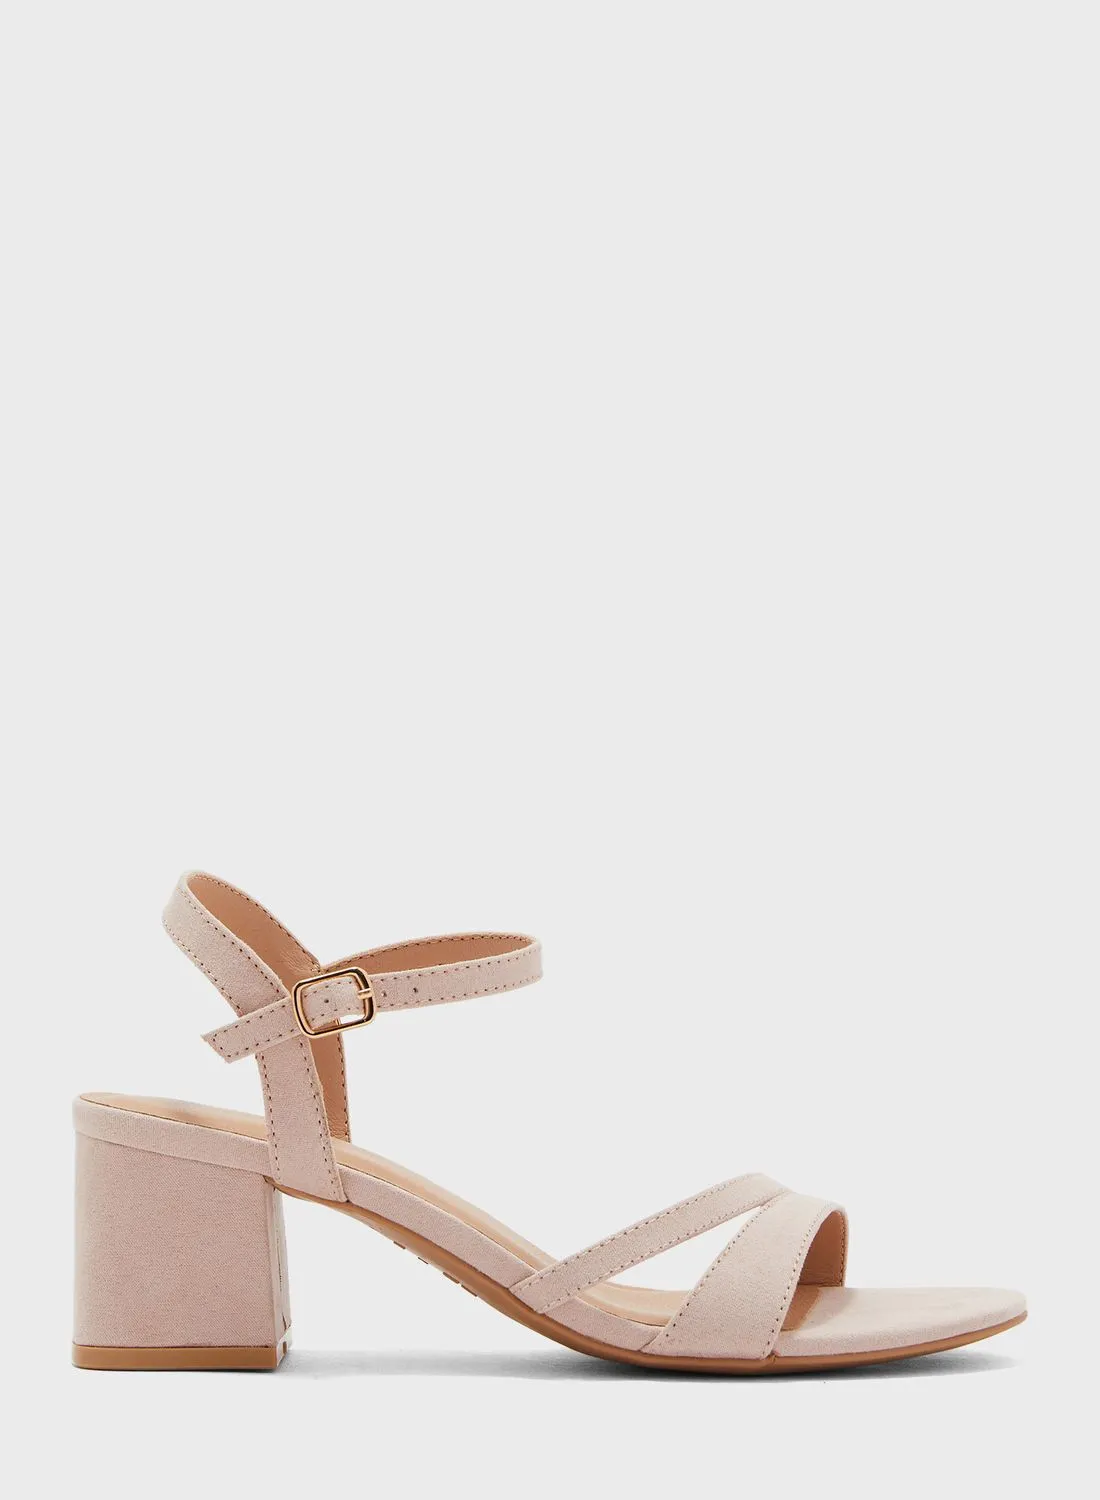 NEW LOOK Vino Ankle Strap Sandals